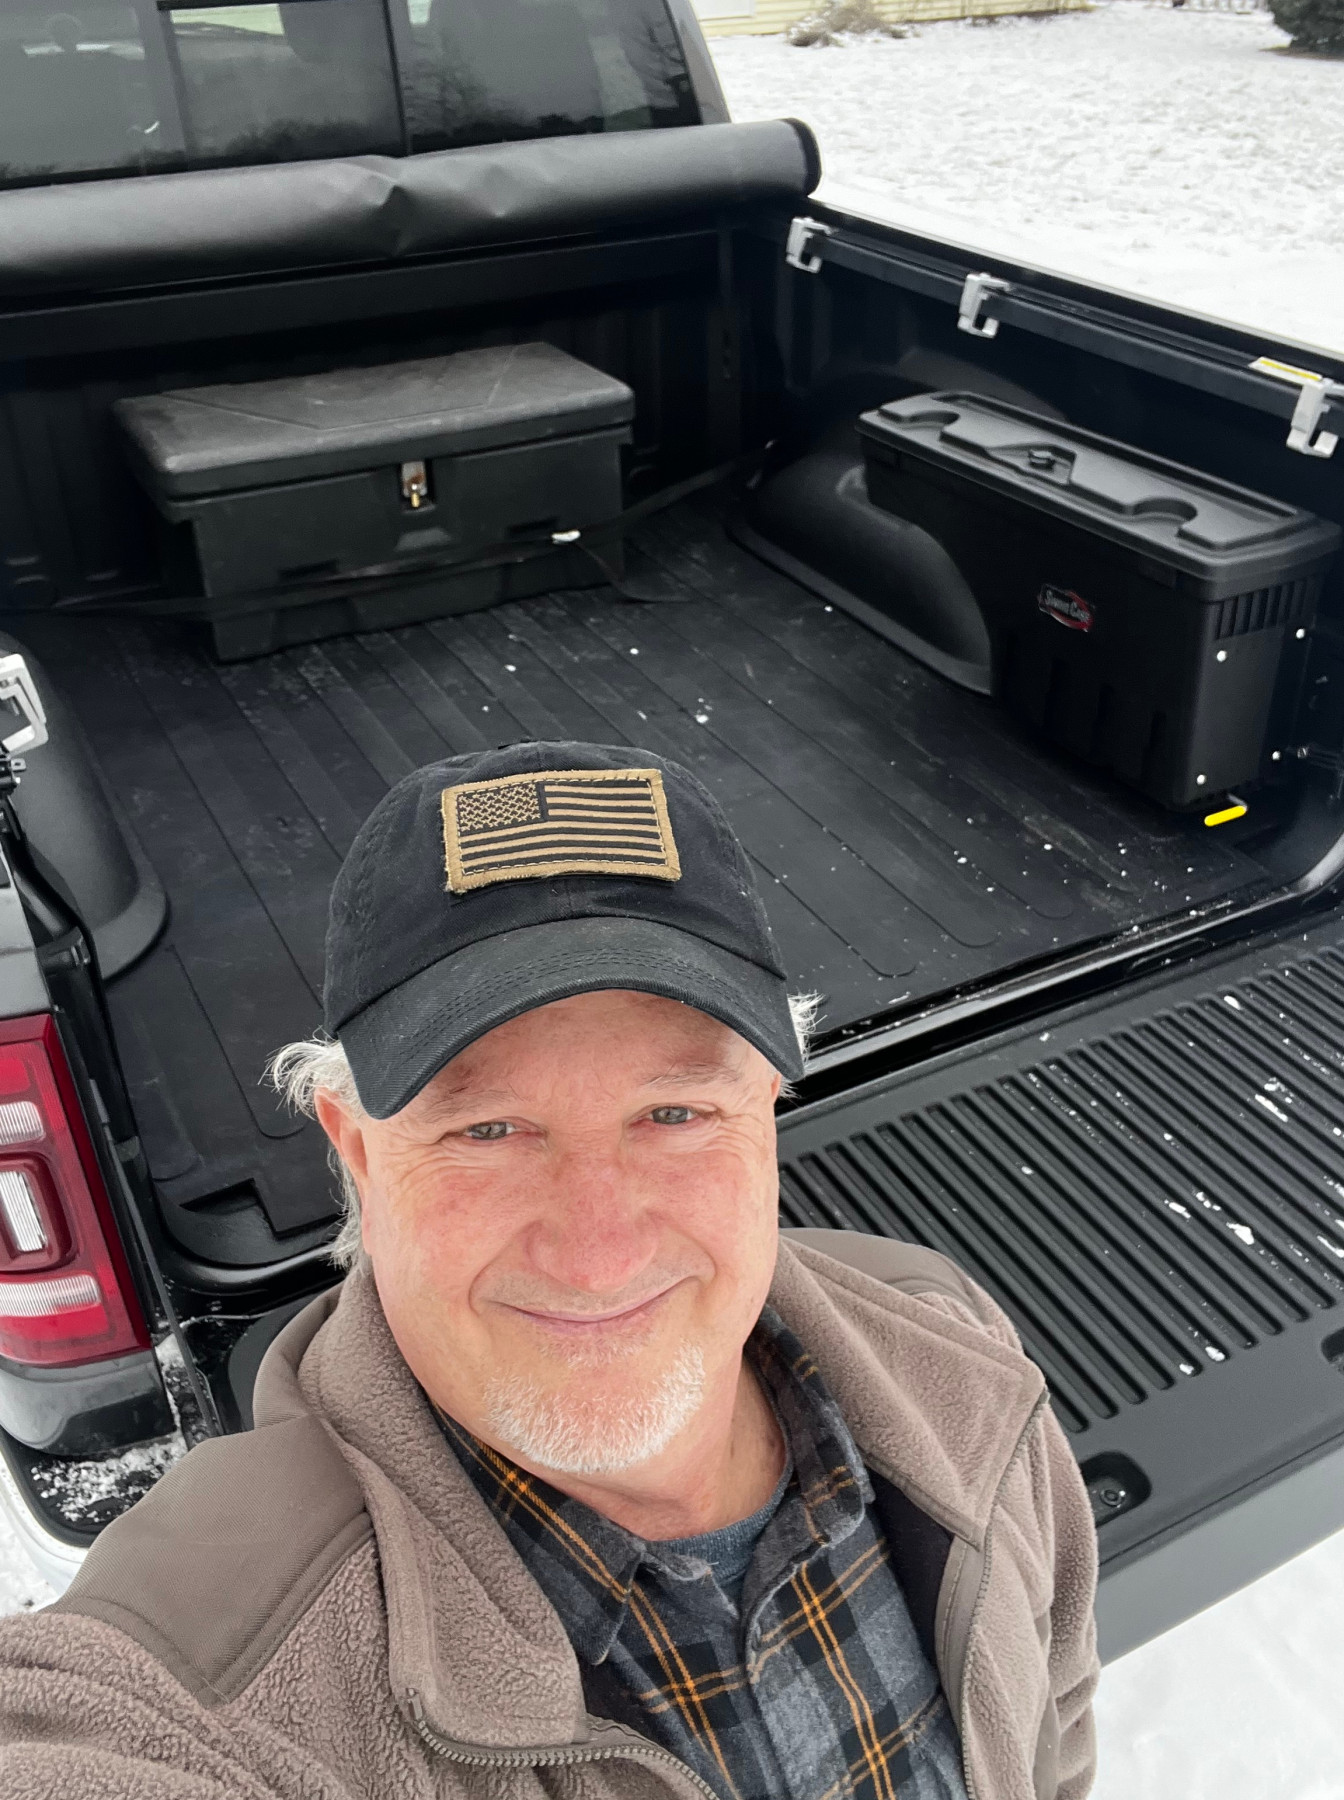 DualLiner Reviews - What People Say About the DualLiner Truck Bed Liner